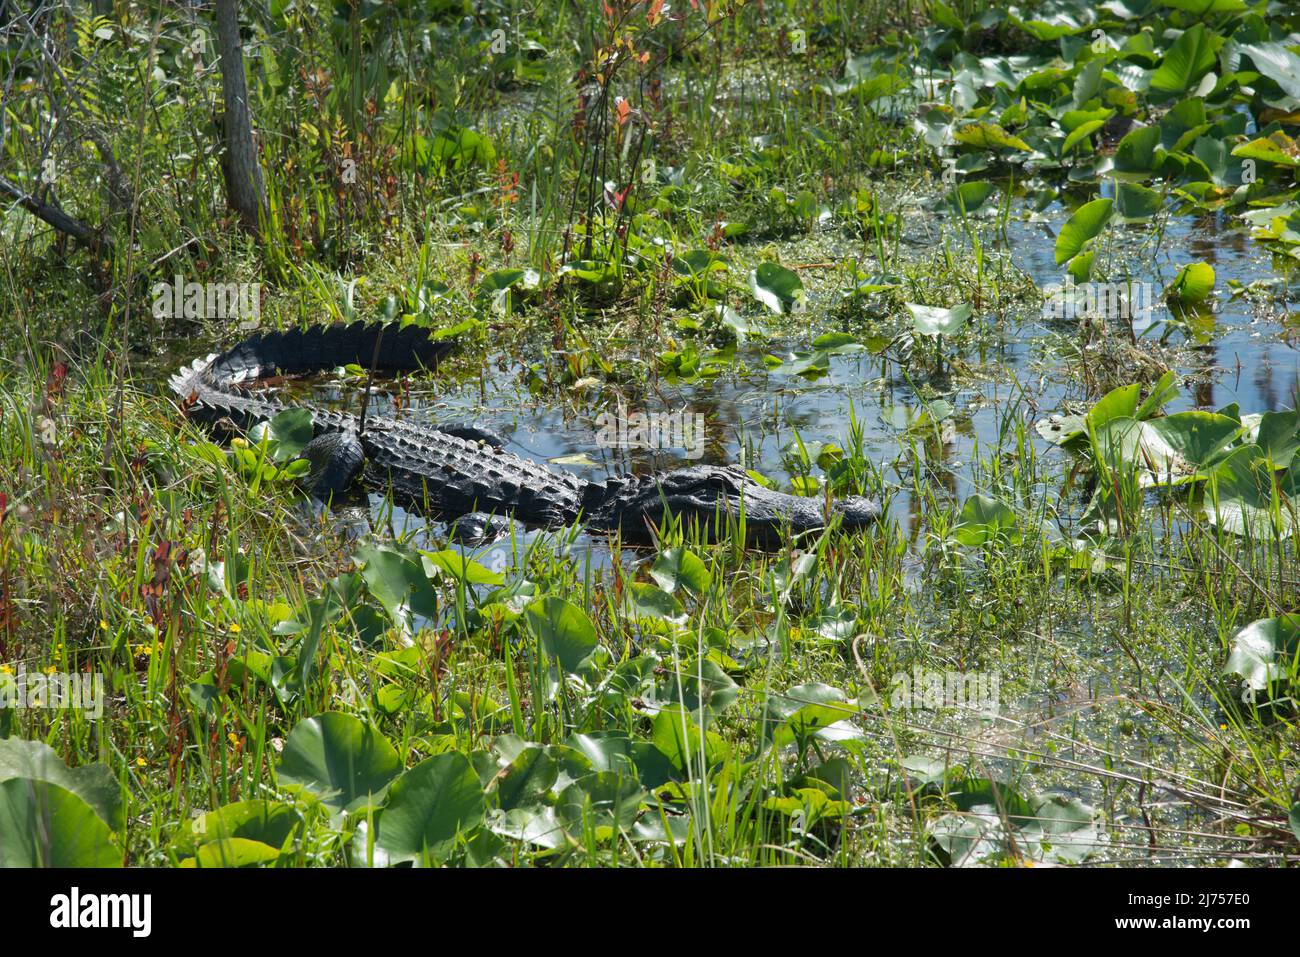 An American Alligator suns himself in shallow water amongst the lily pads in the Okefenokee National Wildlife Refuge, Georgia, USA Stock Photo